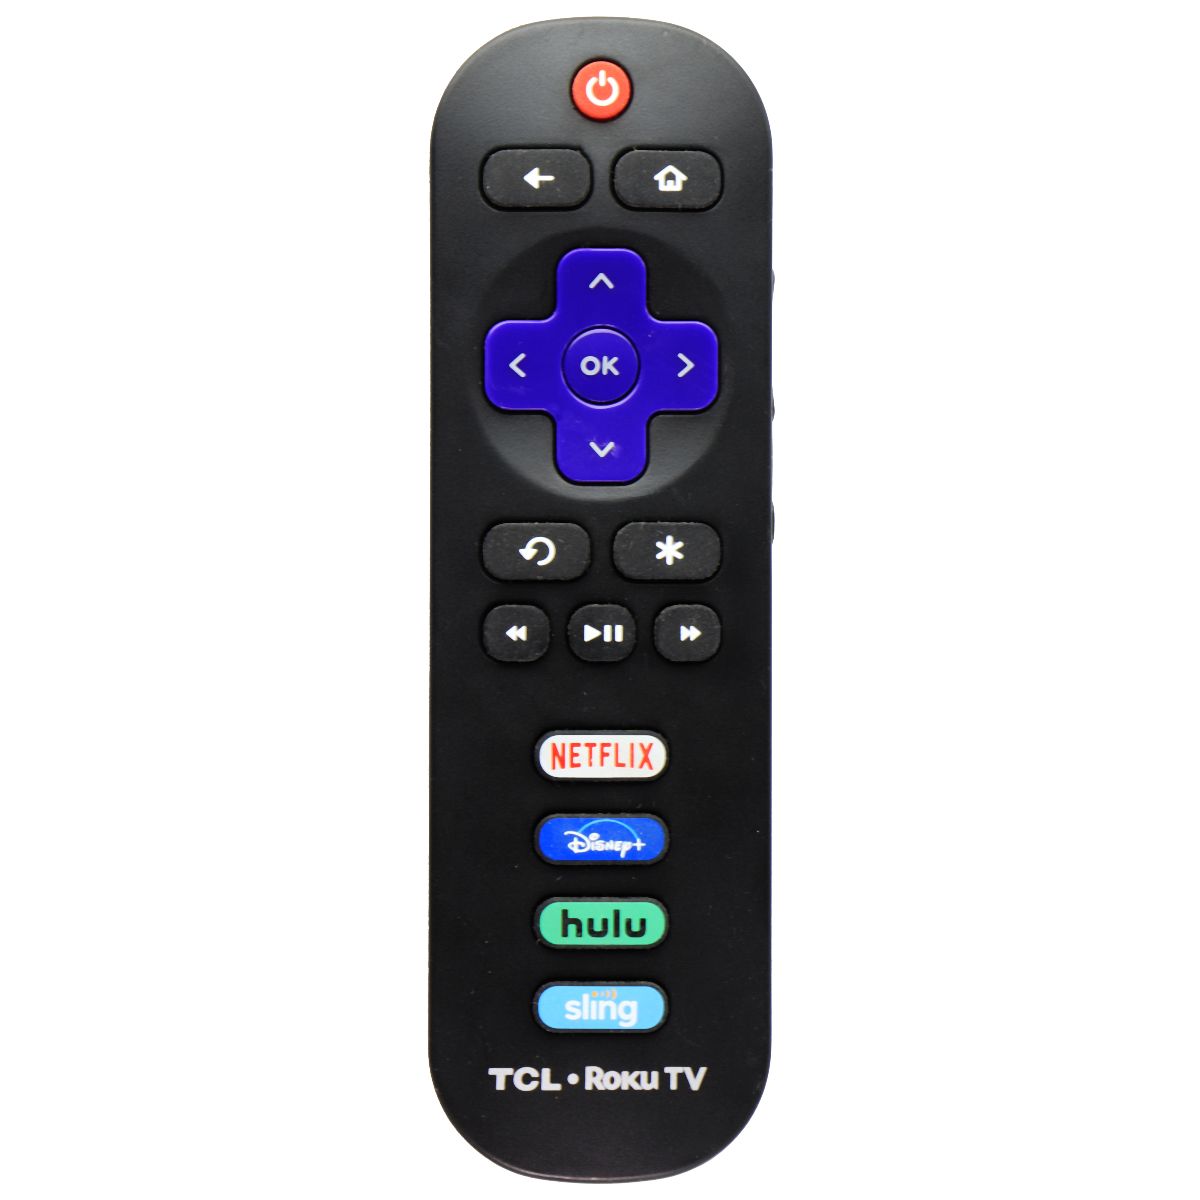 TCL Replacement Roku TV Remote with Netflix/Disney+/Hulu/Sling Hotkey Buttons